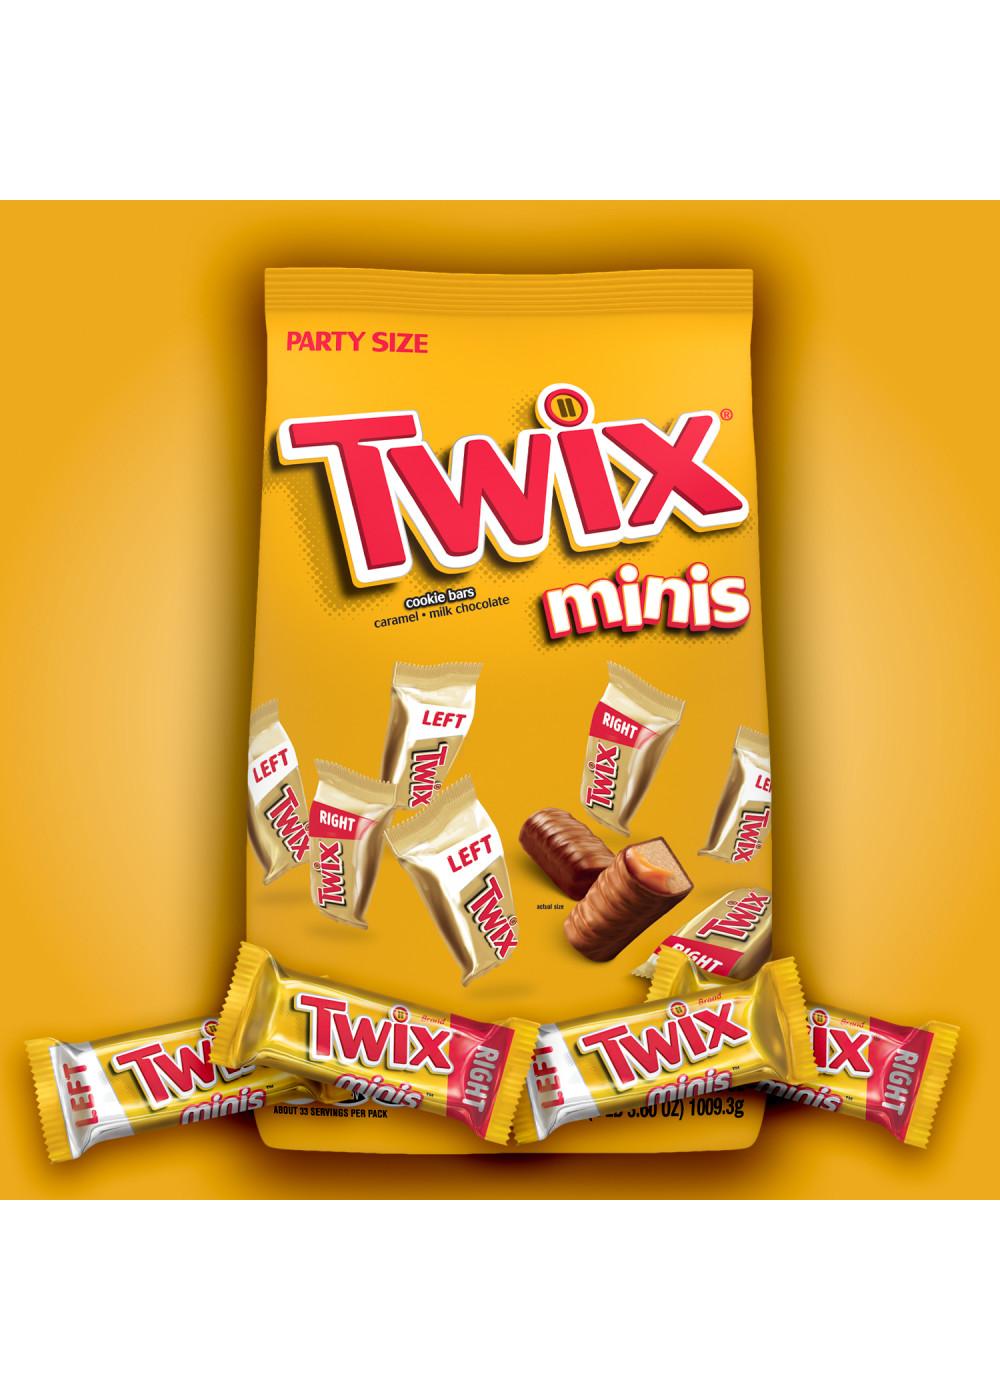 Twix Cookie Bars Minis Candy - Party Size; image 2 of 7